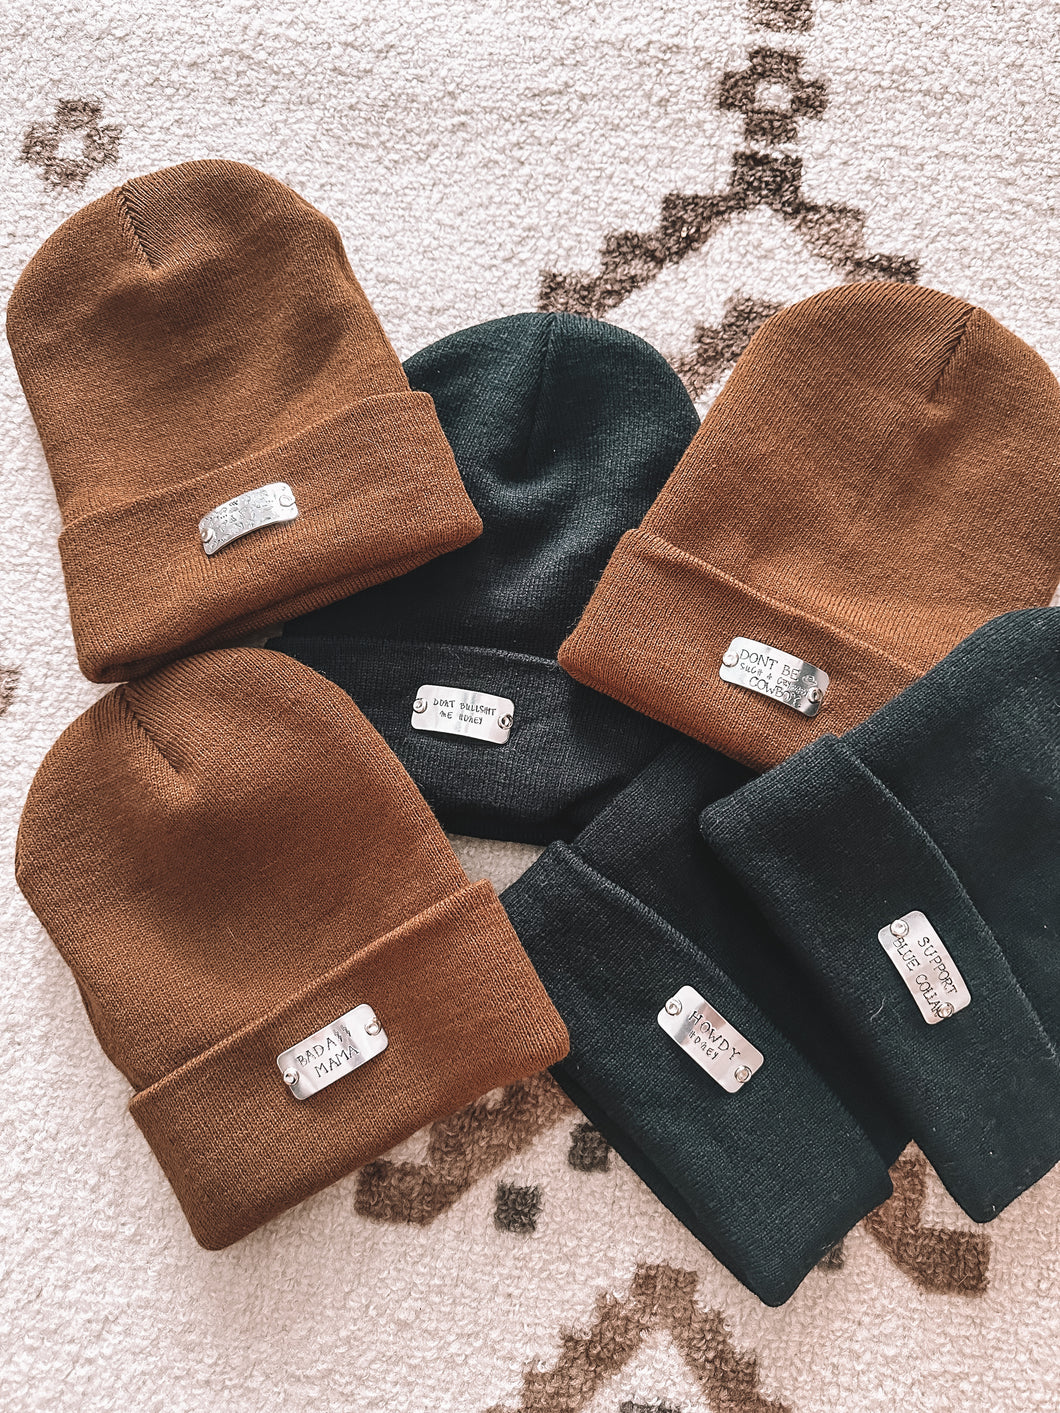 Stamped Beanies